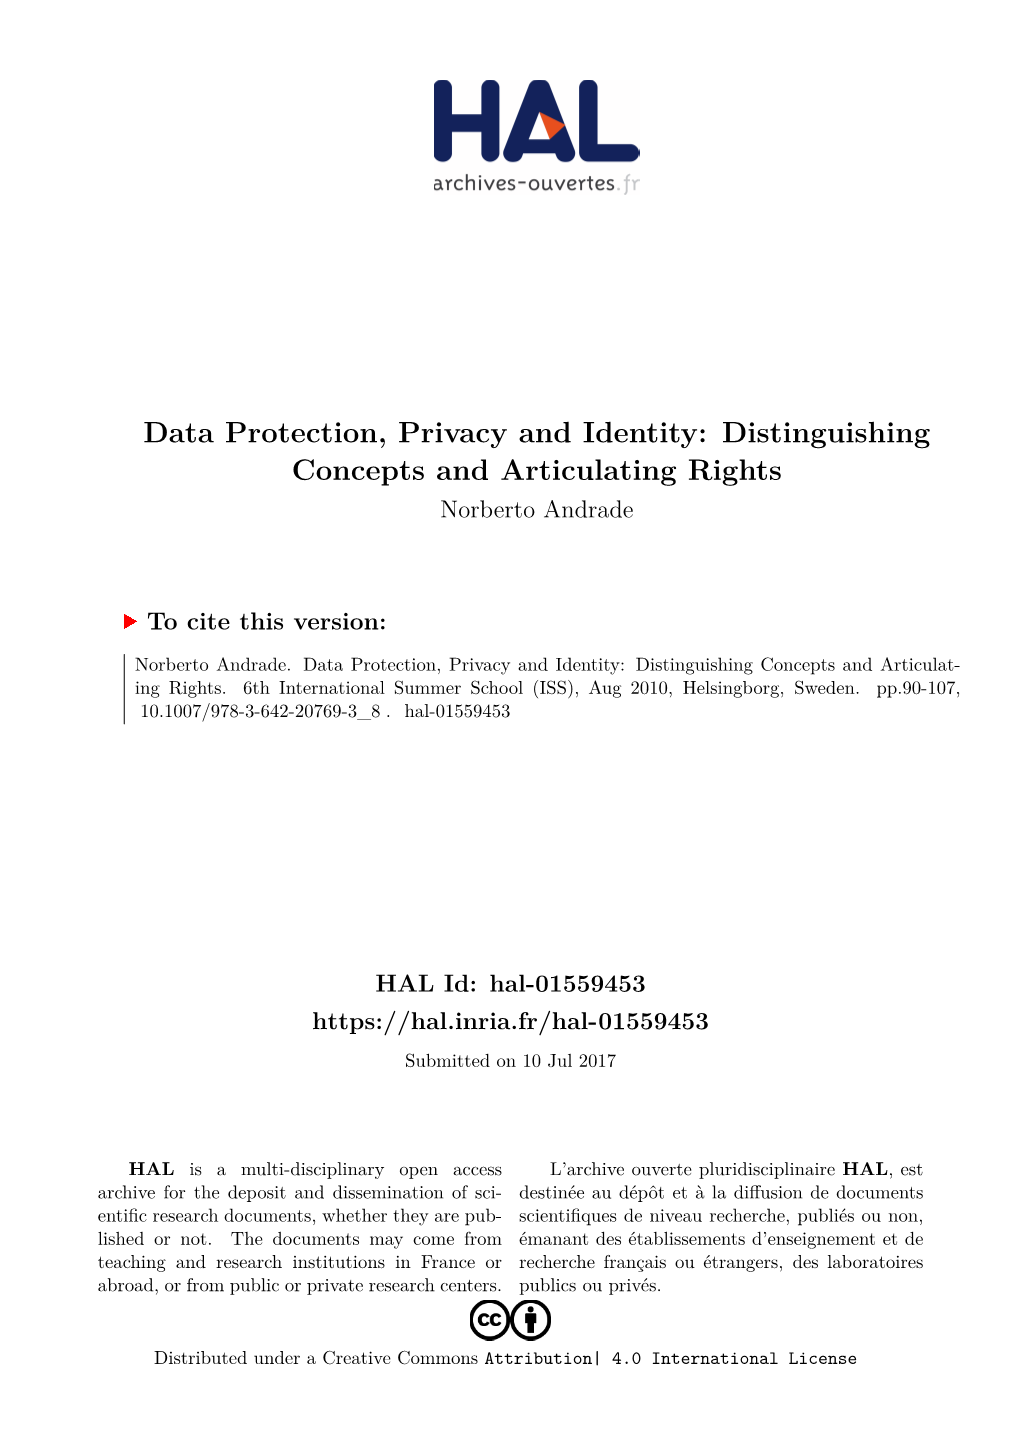 Data Protection, Privacy and Identity: Distinguishing Concepts and Articulating Rights Norberto Andrade